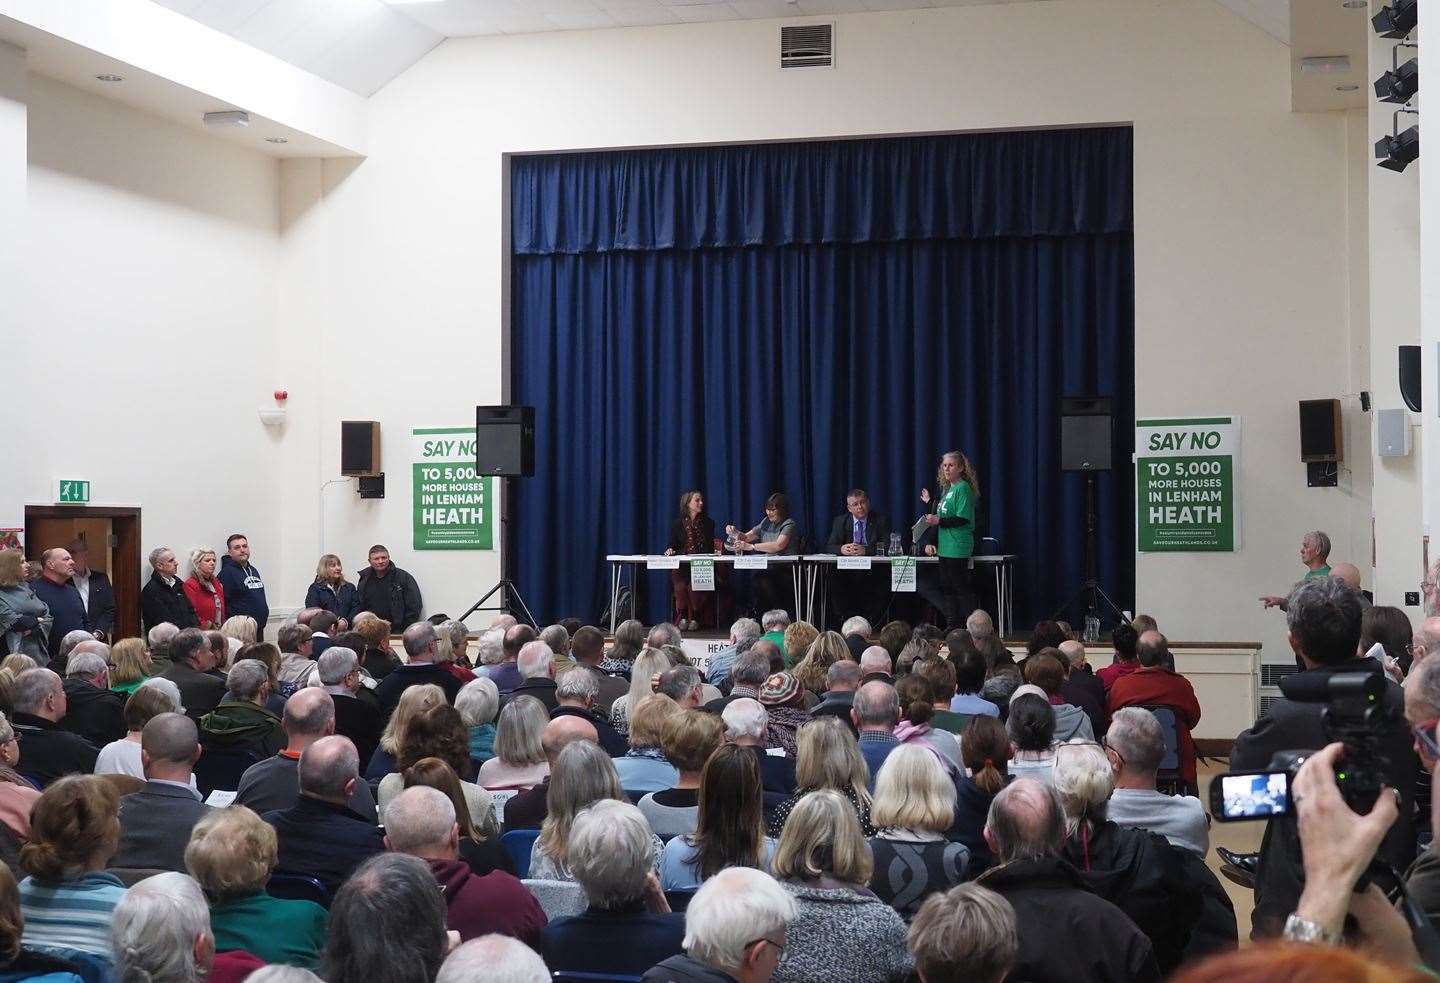 A public meeting held pre-Covid, when the council was still looking to create 5,000 new homes at Lenham Heath